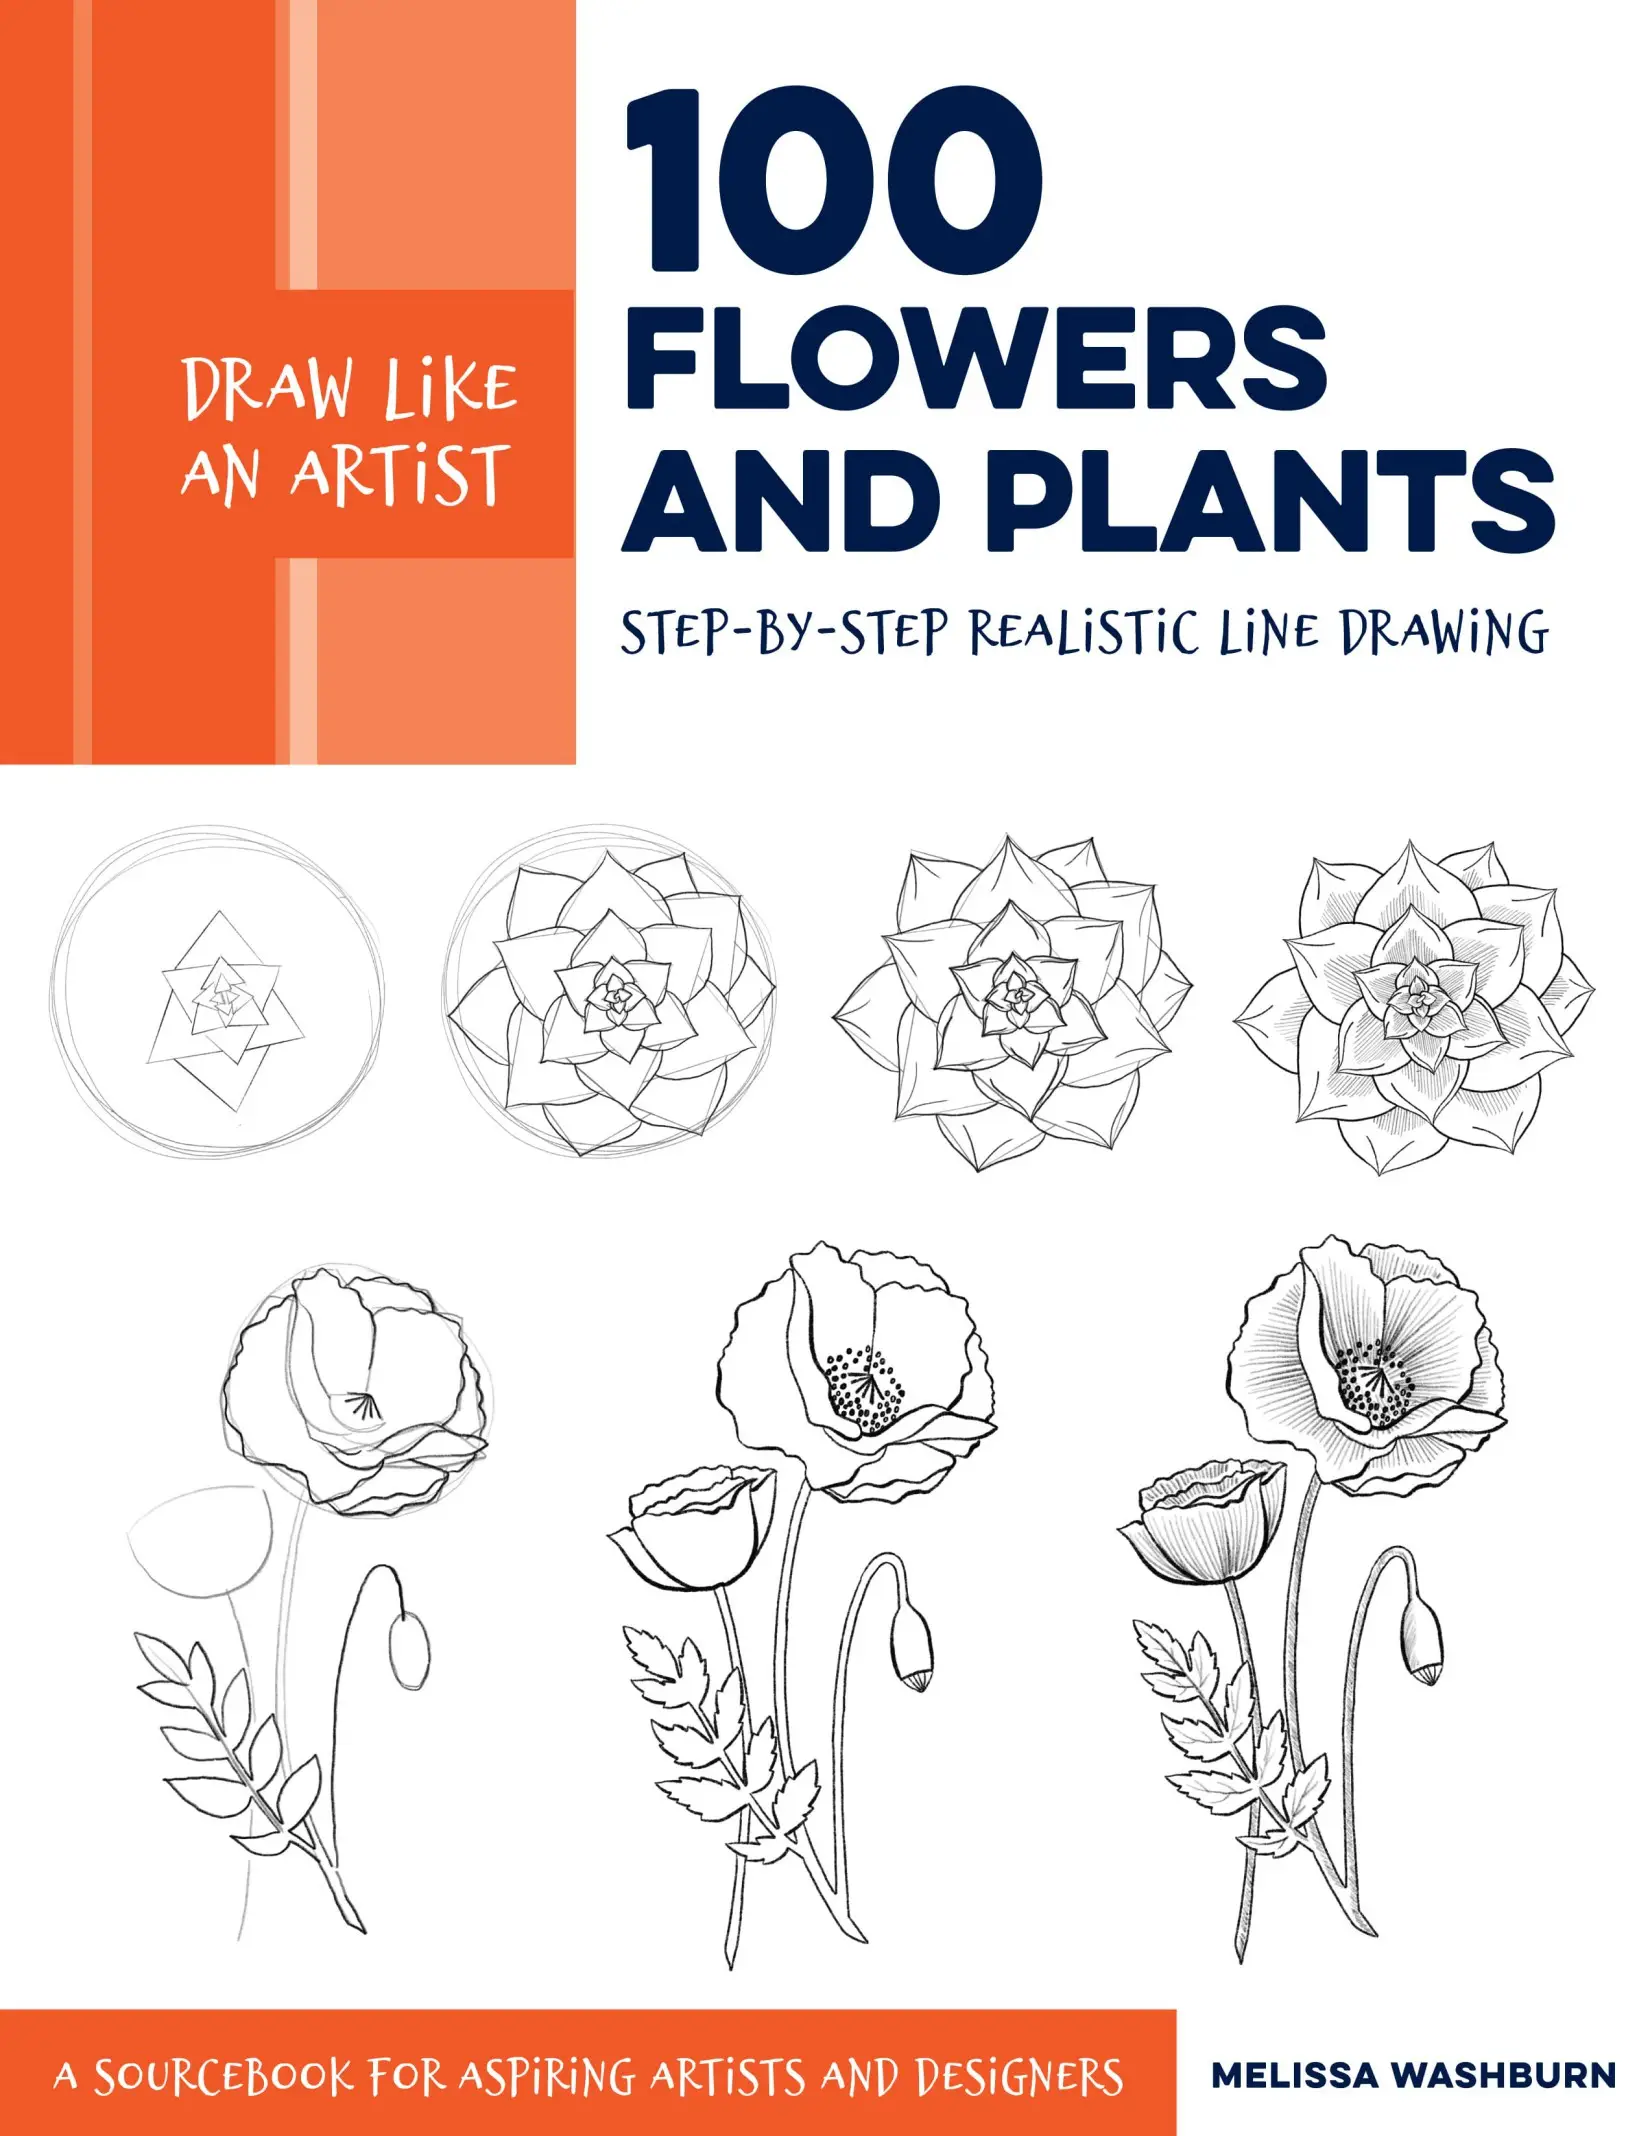 Draw Like an Artist: 100 Flowers and Plants: Step-by-Step Realistic